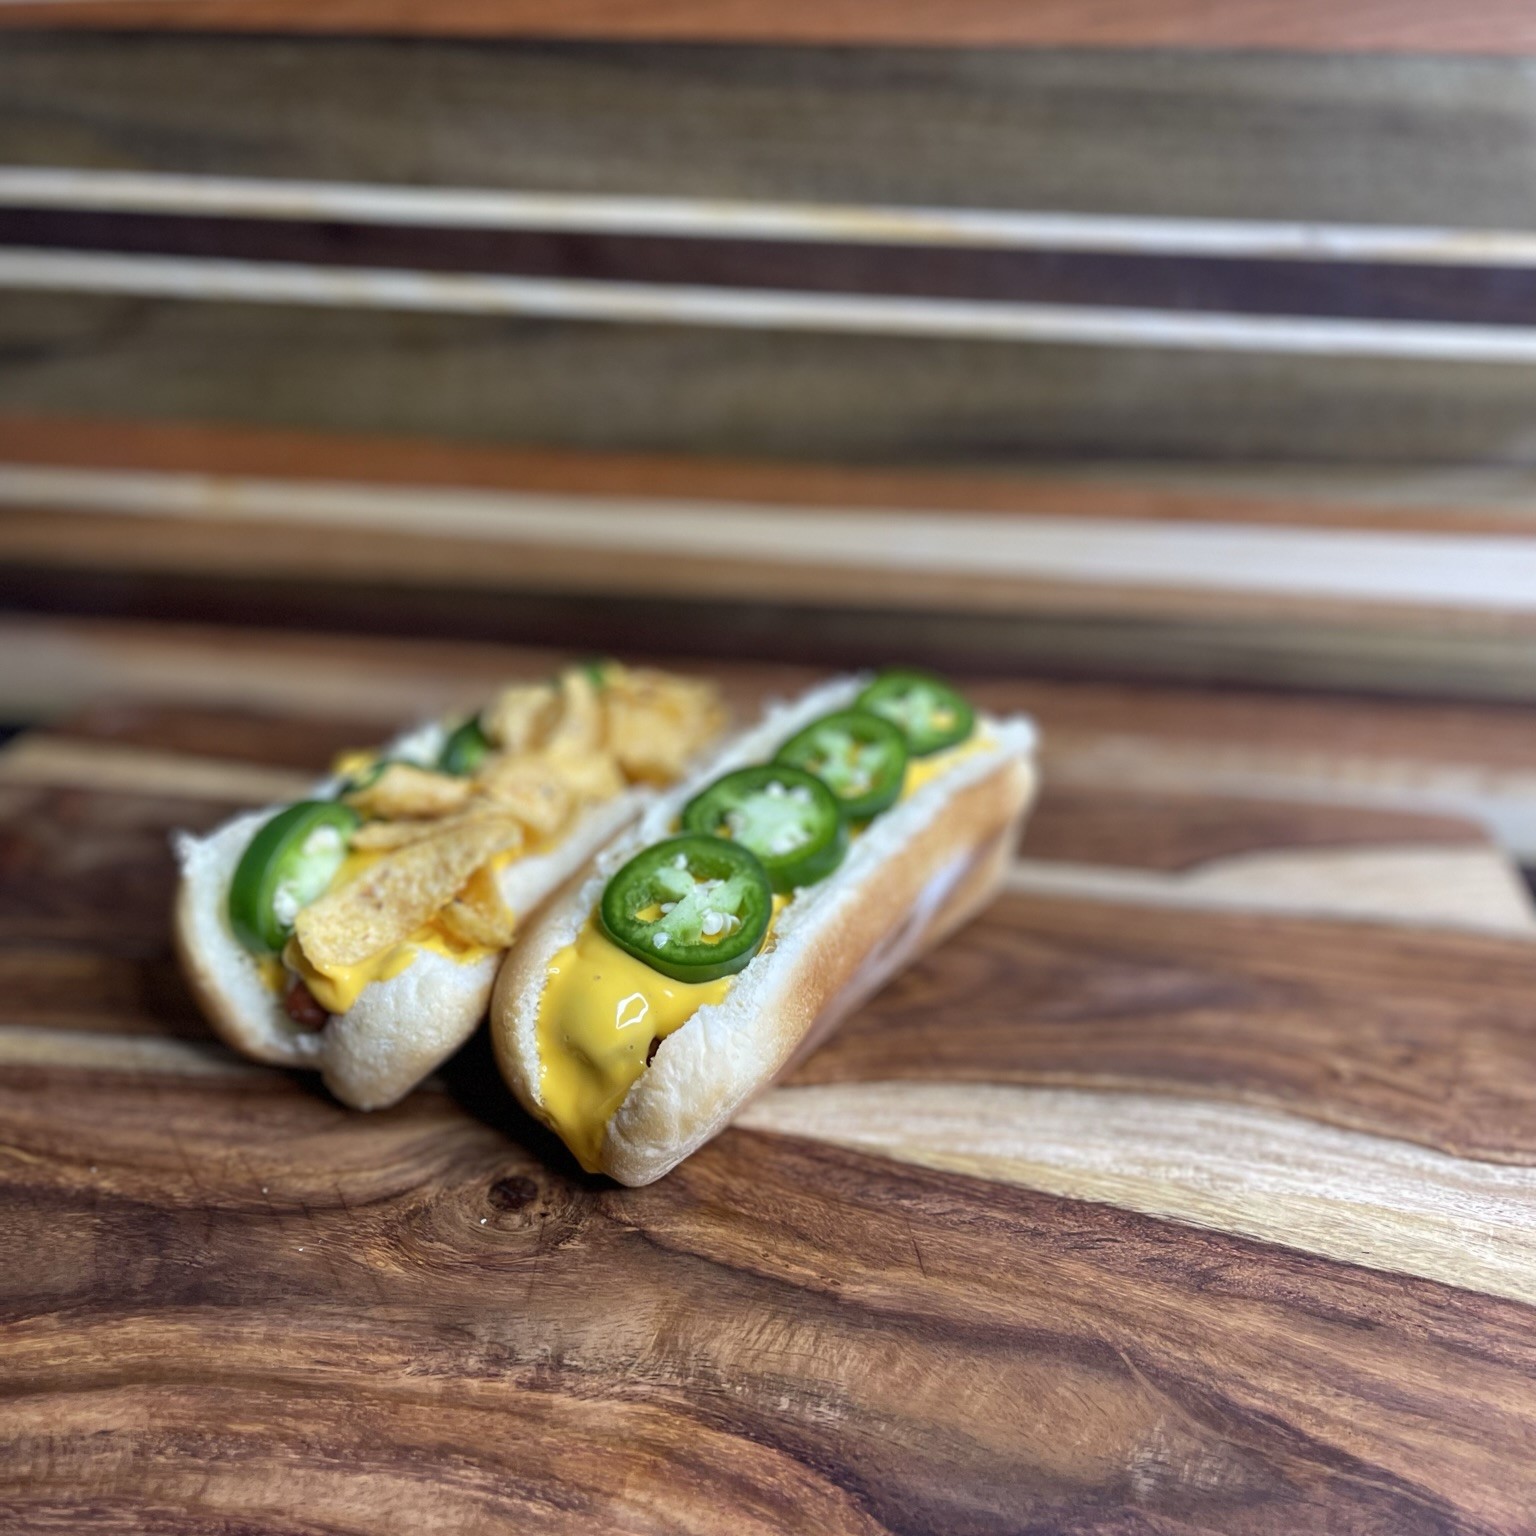 Jalapeno and cheese sauce hot dog recipe